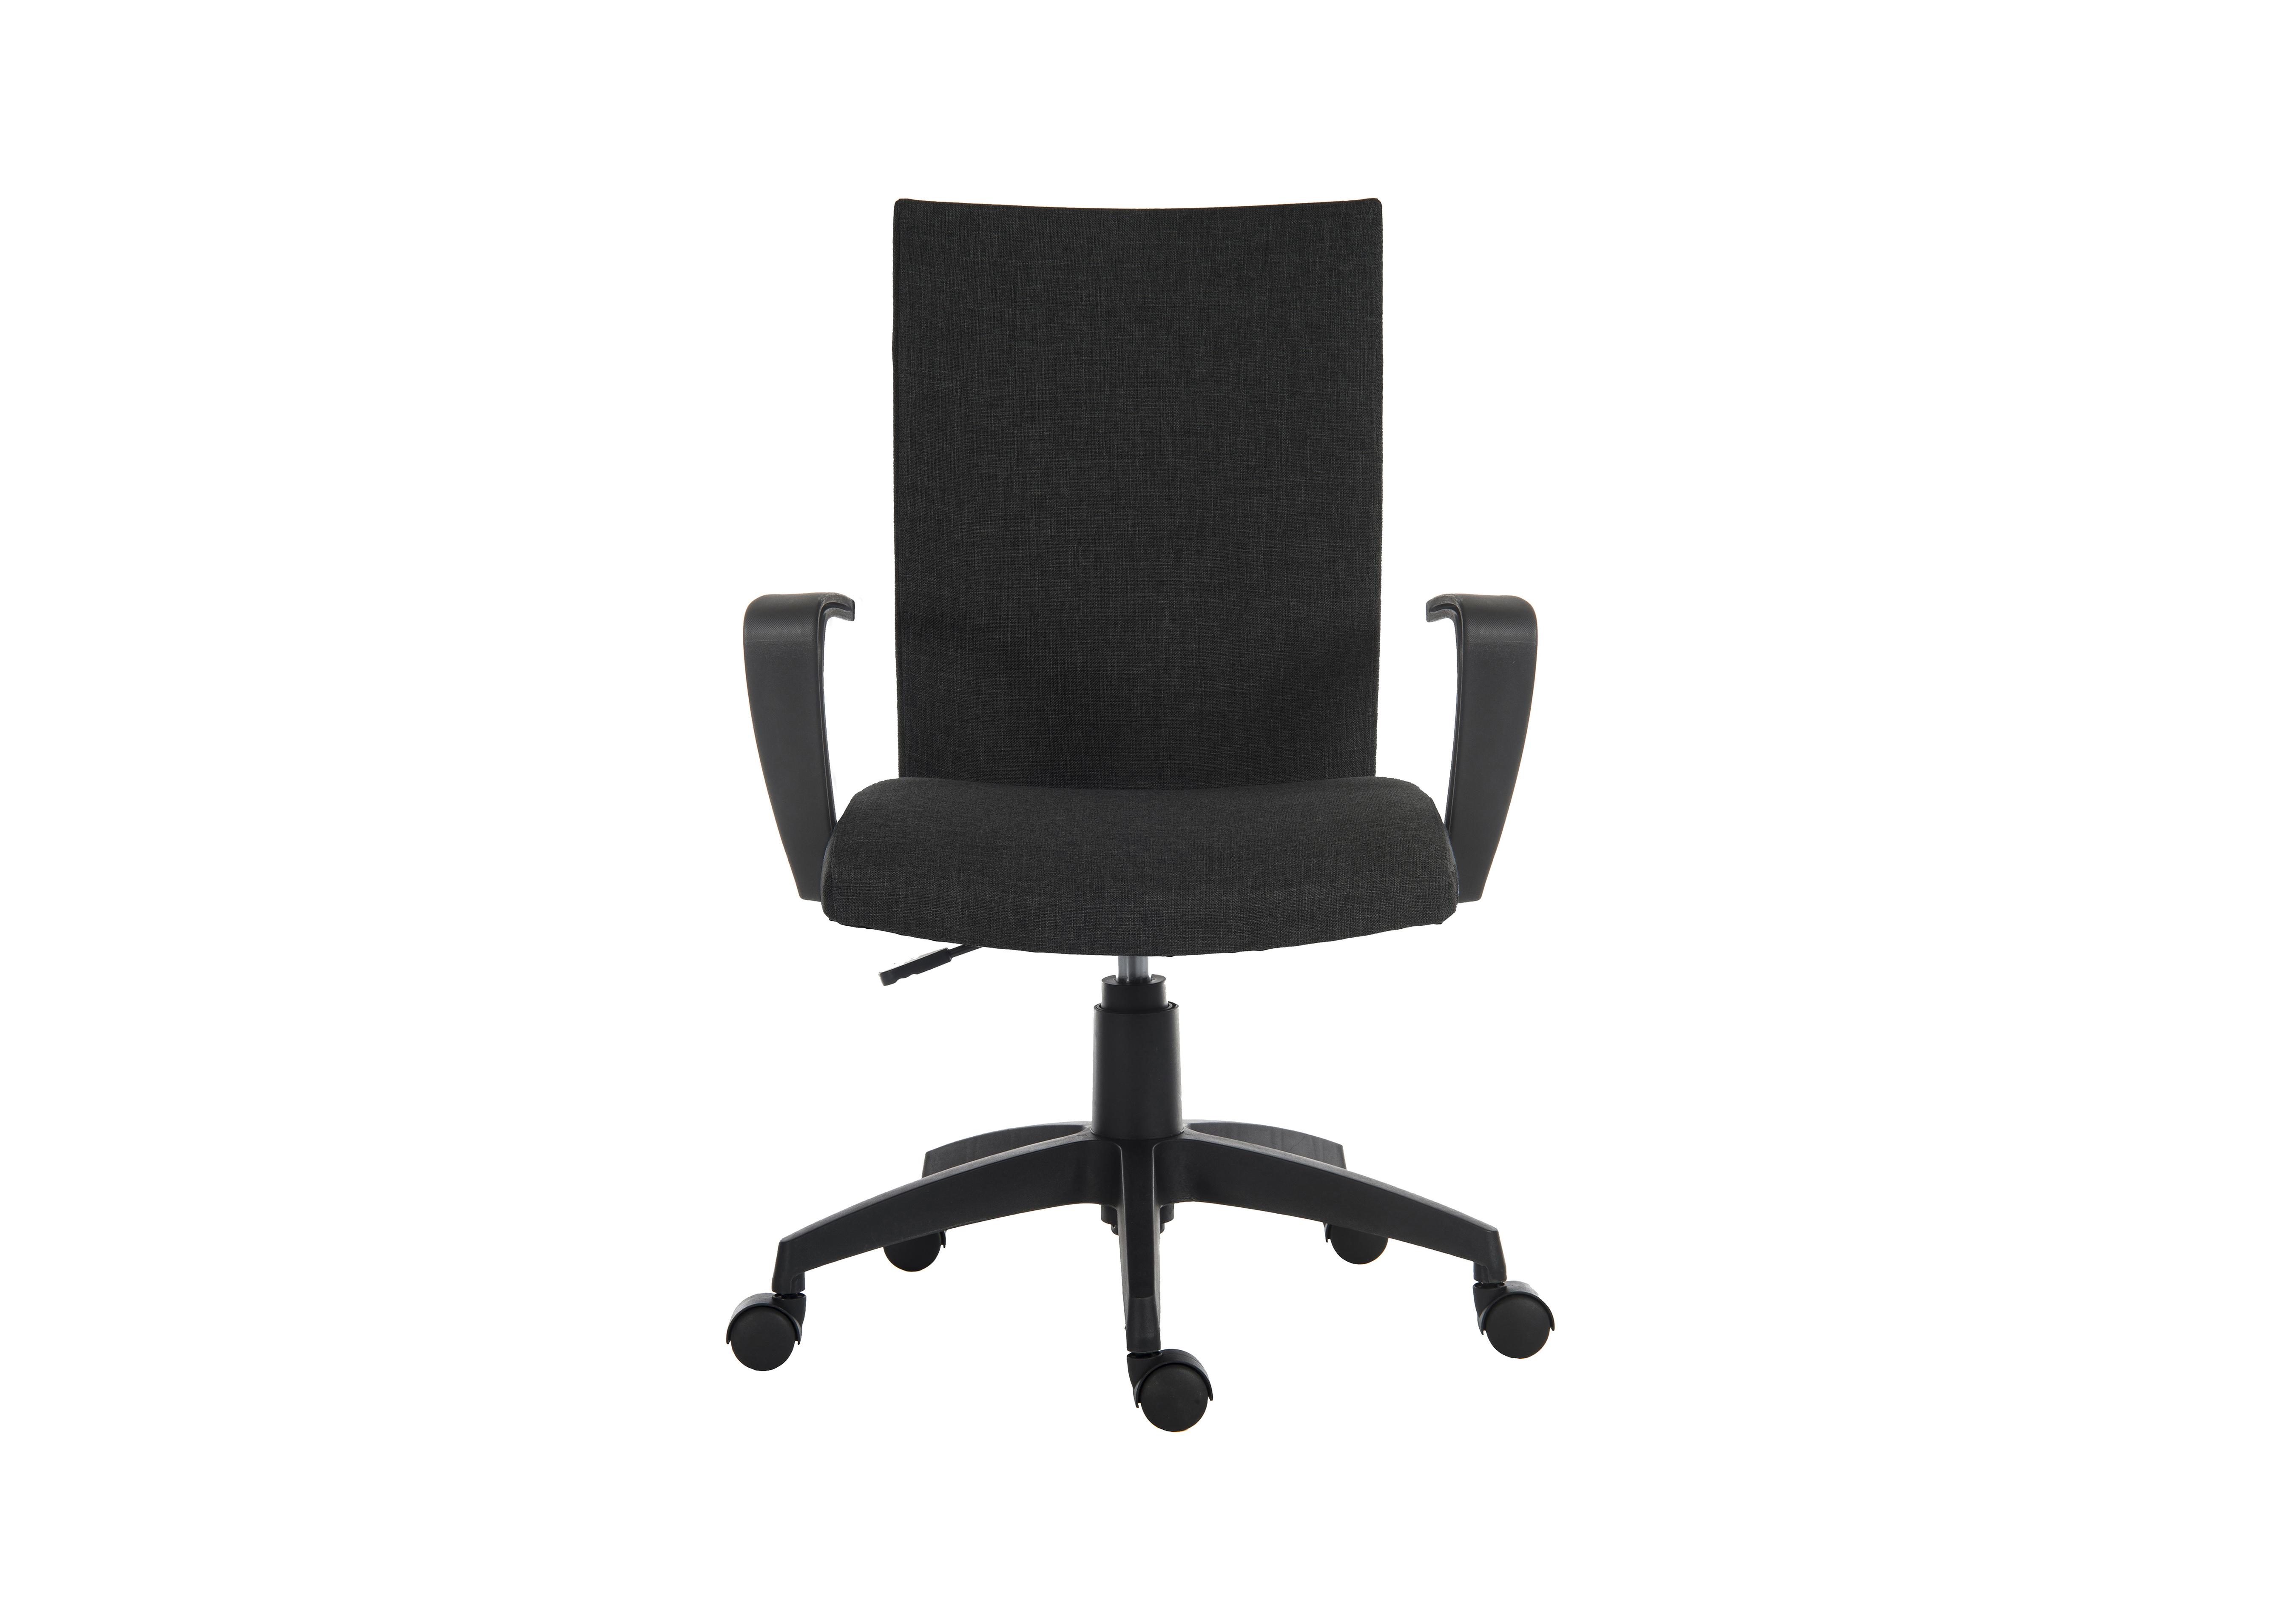 East River Work Chair in Black on Furniture Village